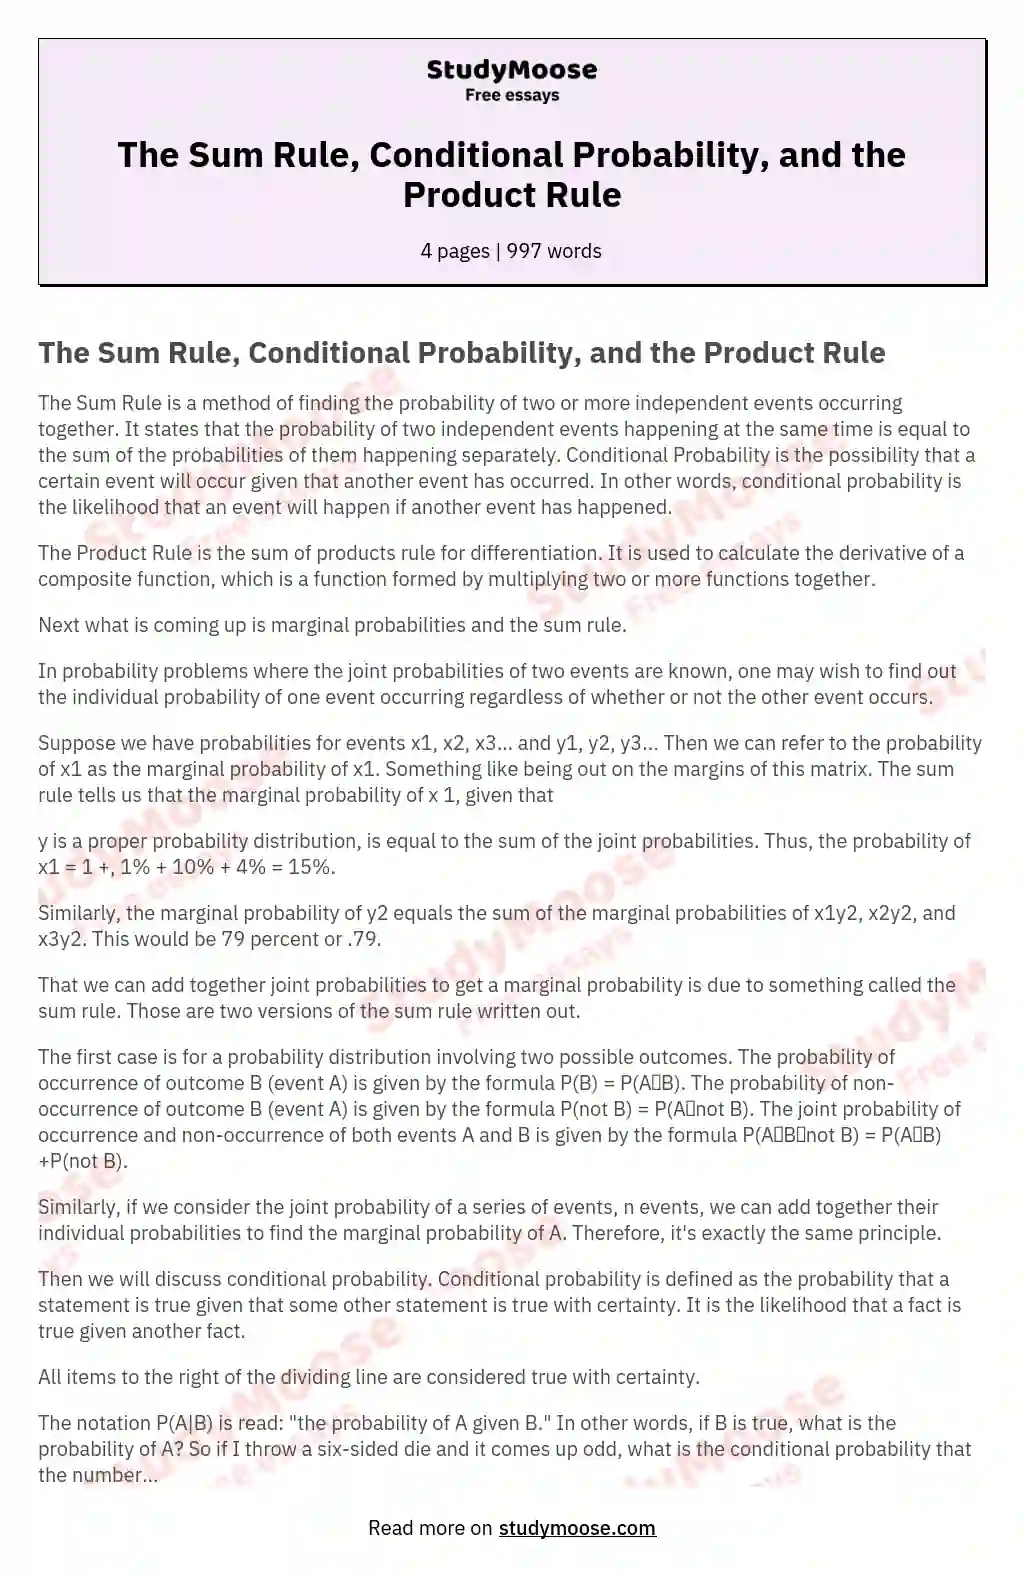 The Sum Rule, Conditional Probability, and the Product Rule essay